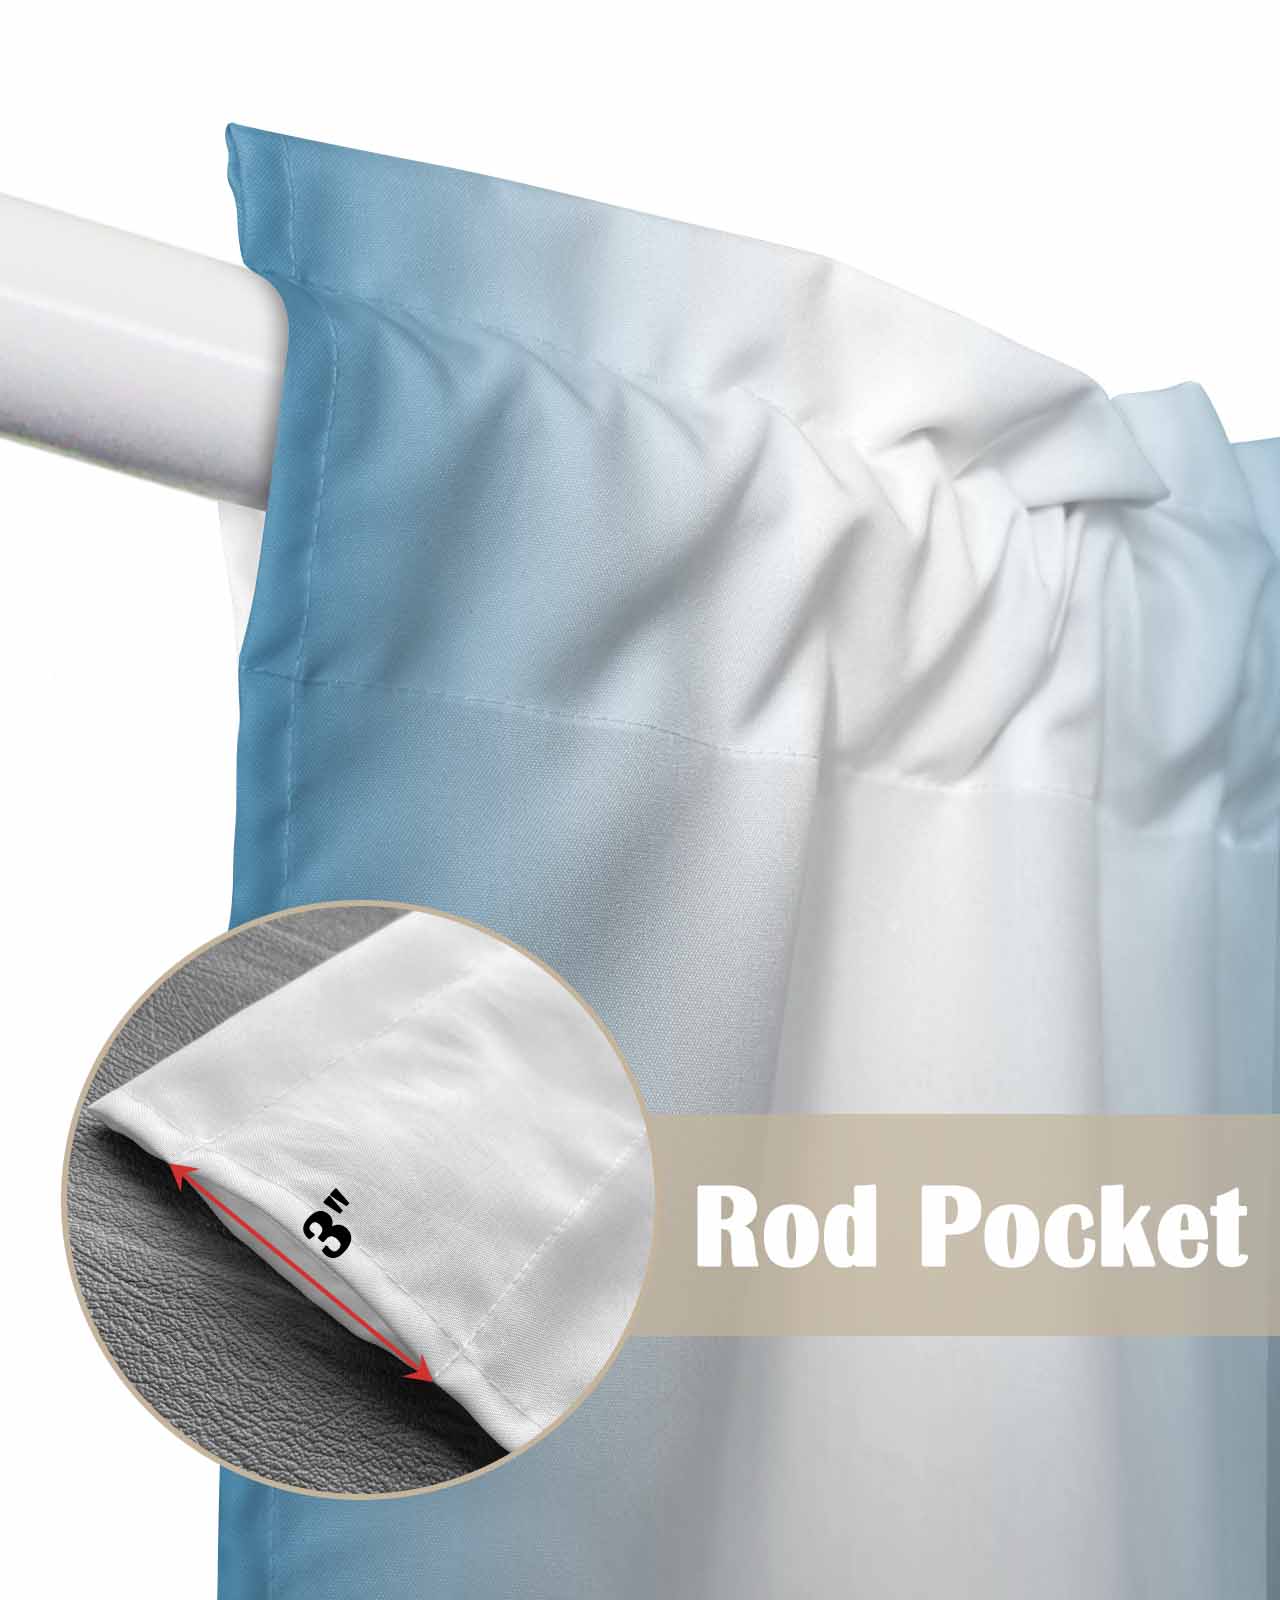 Swag Valance Curtains Blue and White Gradient Rod Pocket Kitchen ...